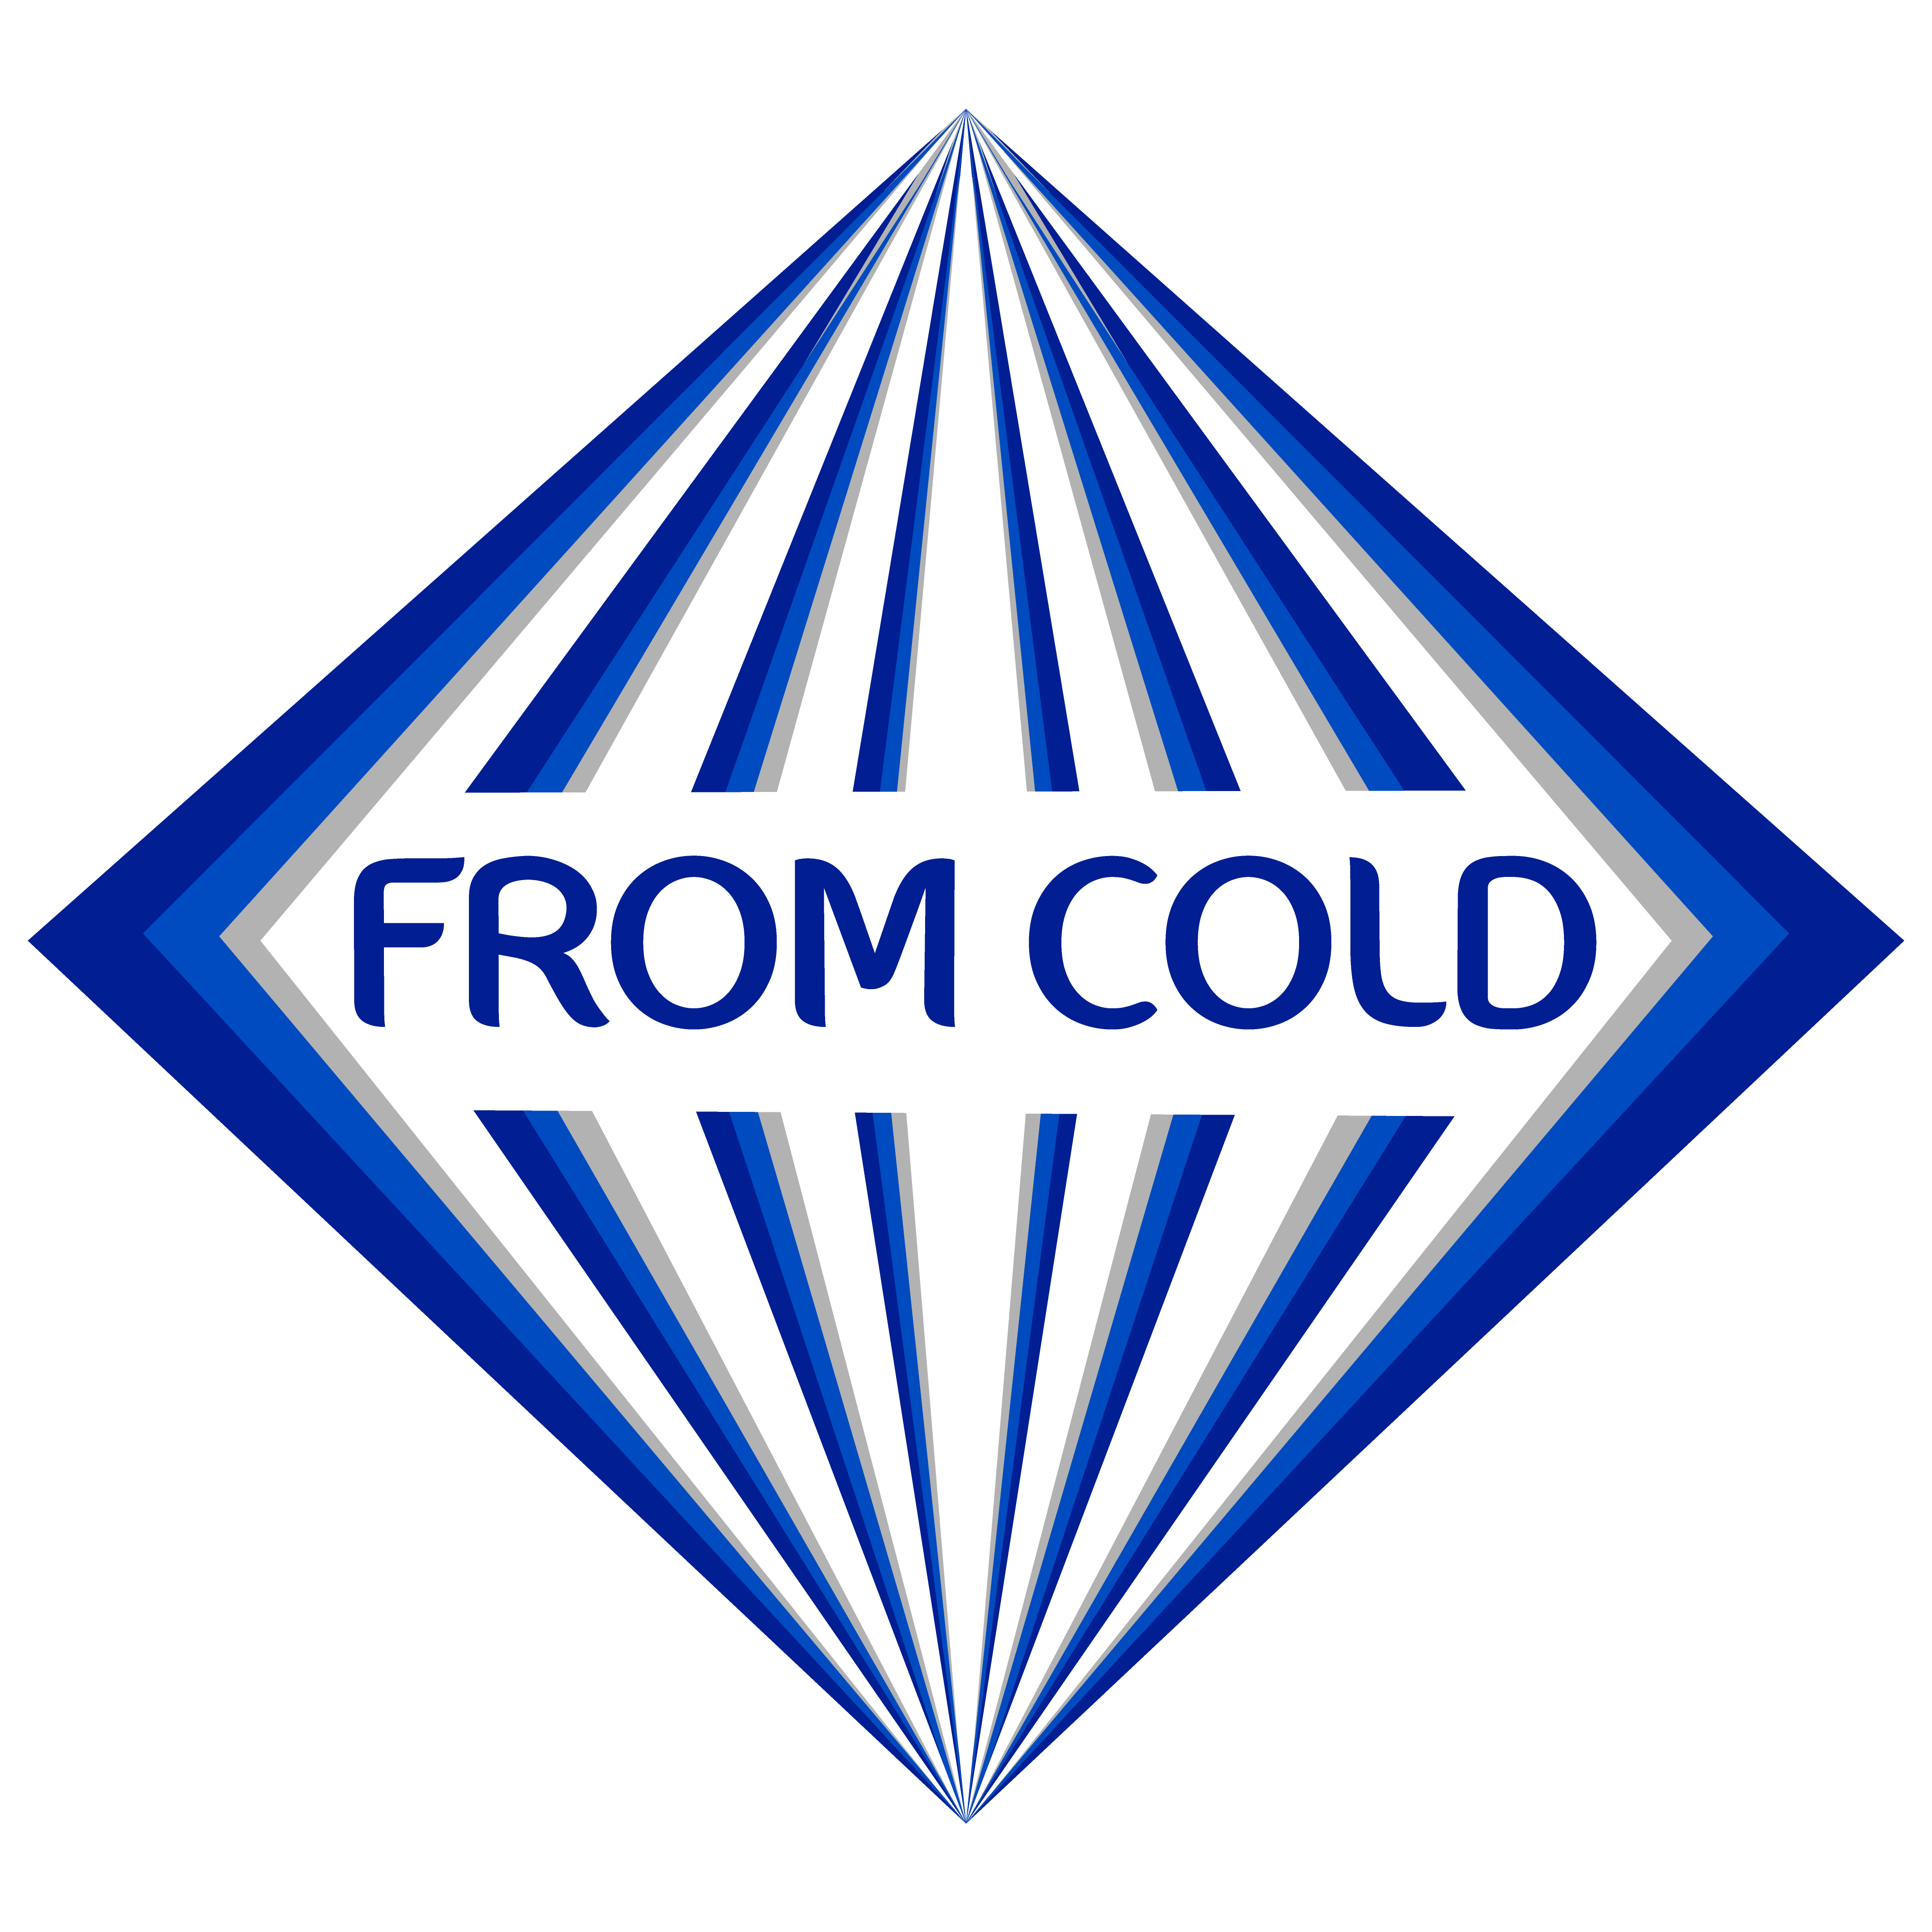 LOGO-FROM-COLD